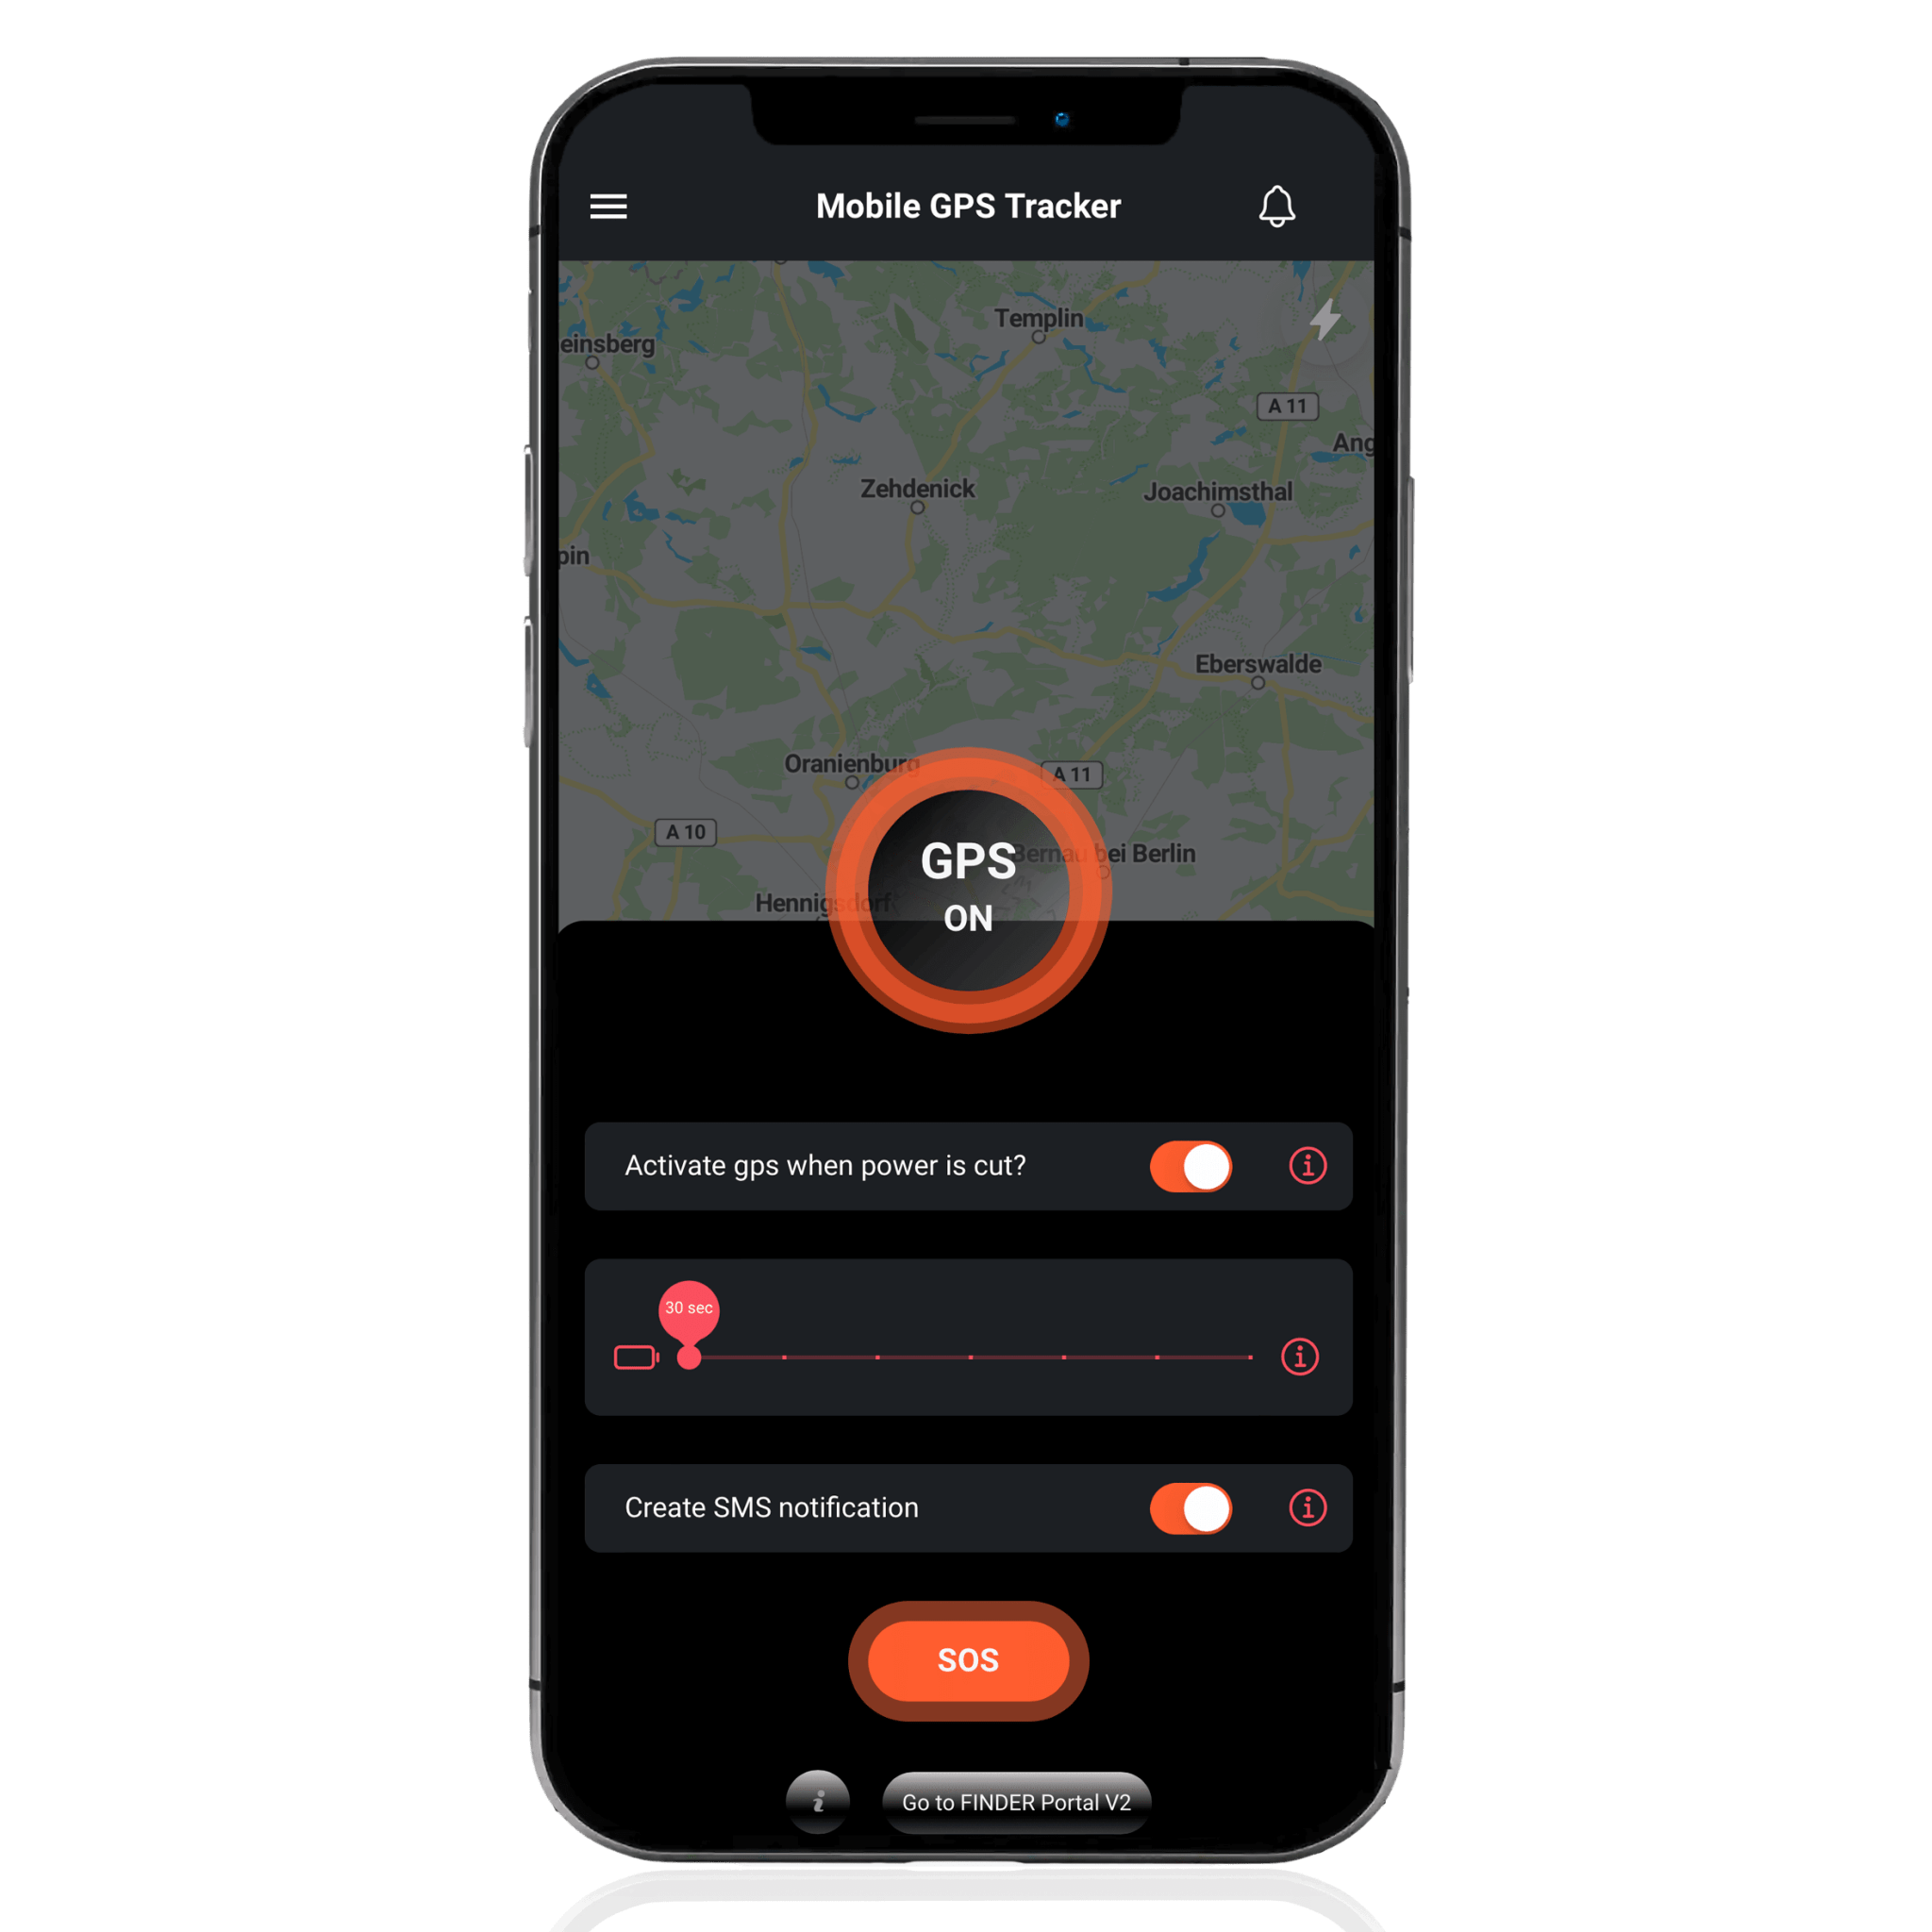 Application mobile GPS tracker allumage du tracage